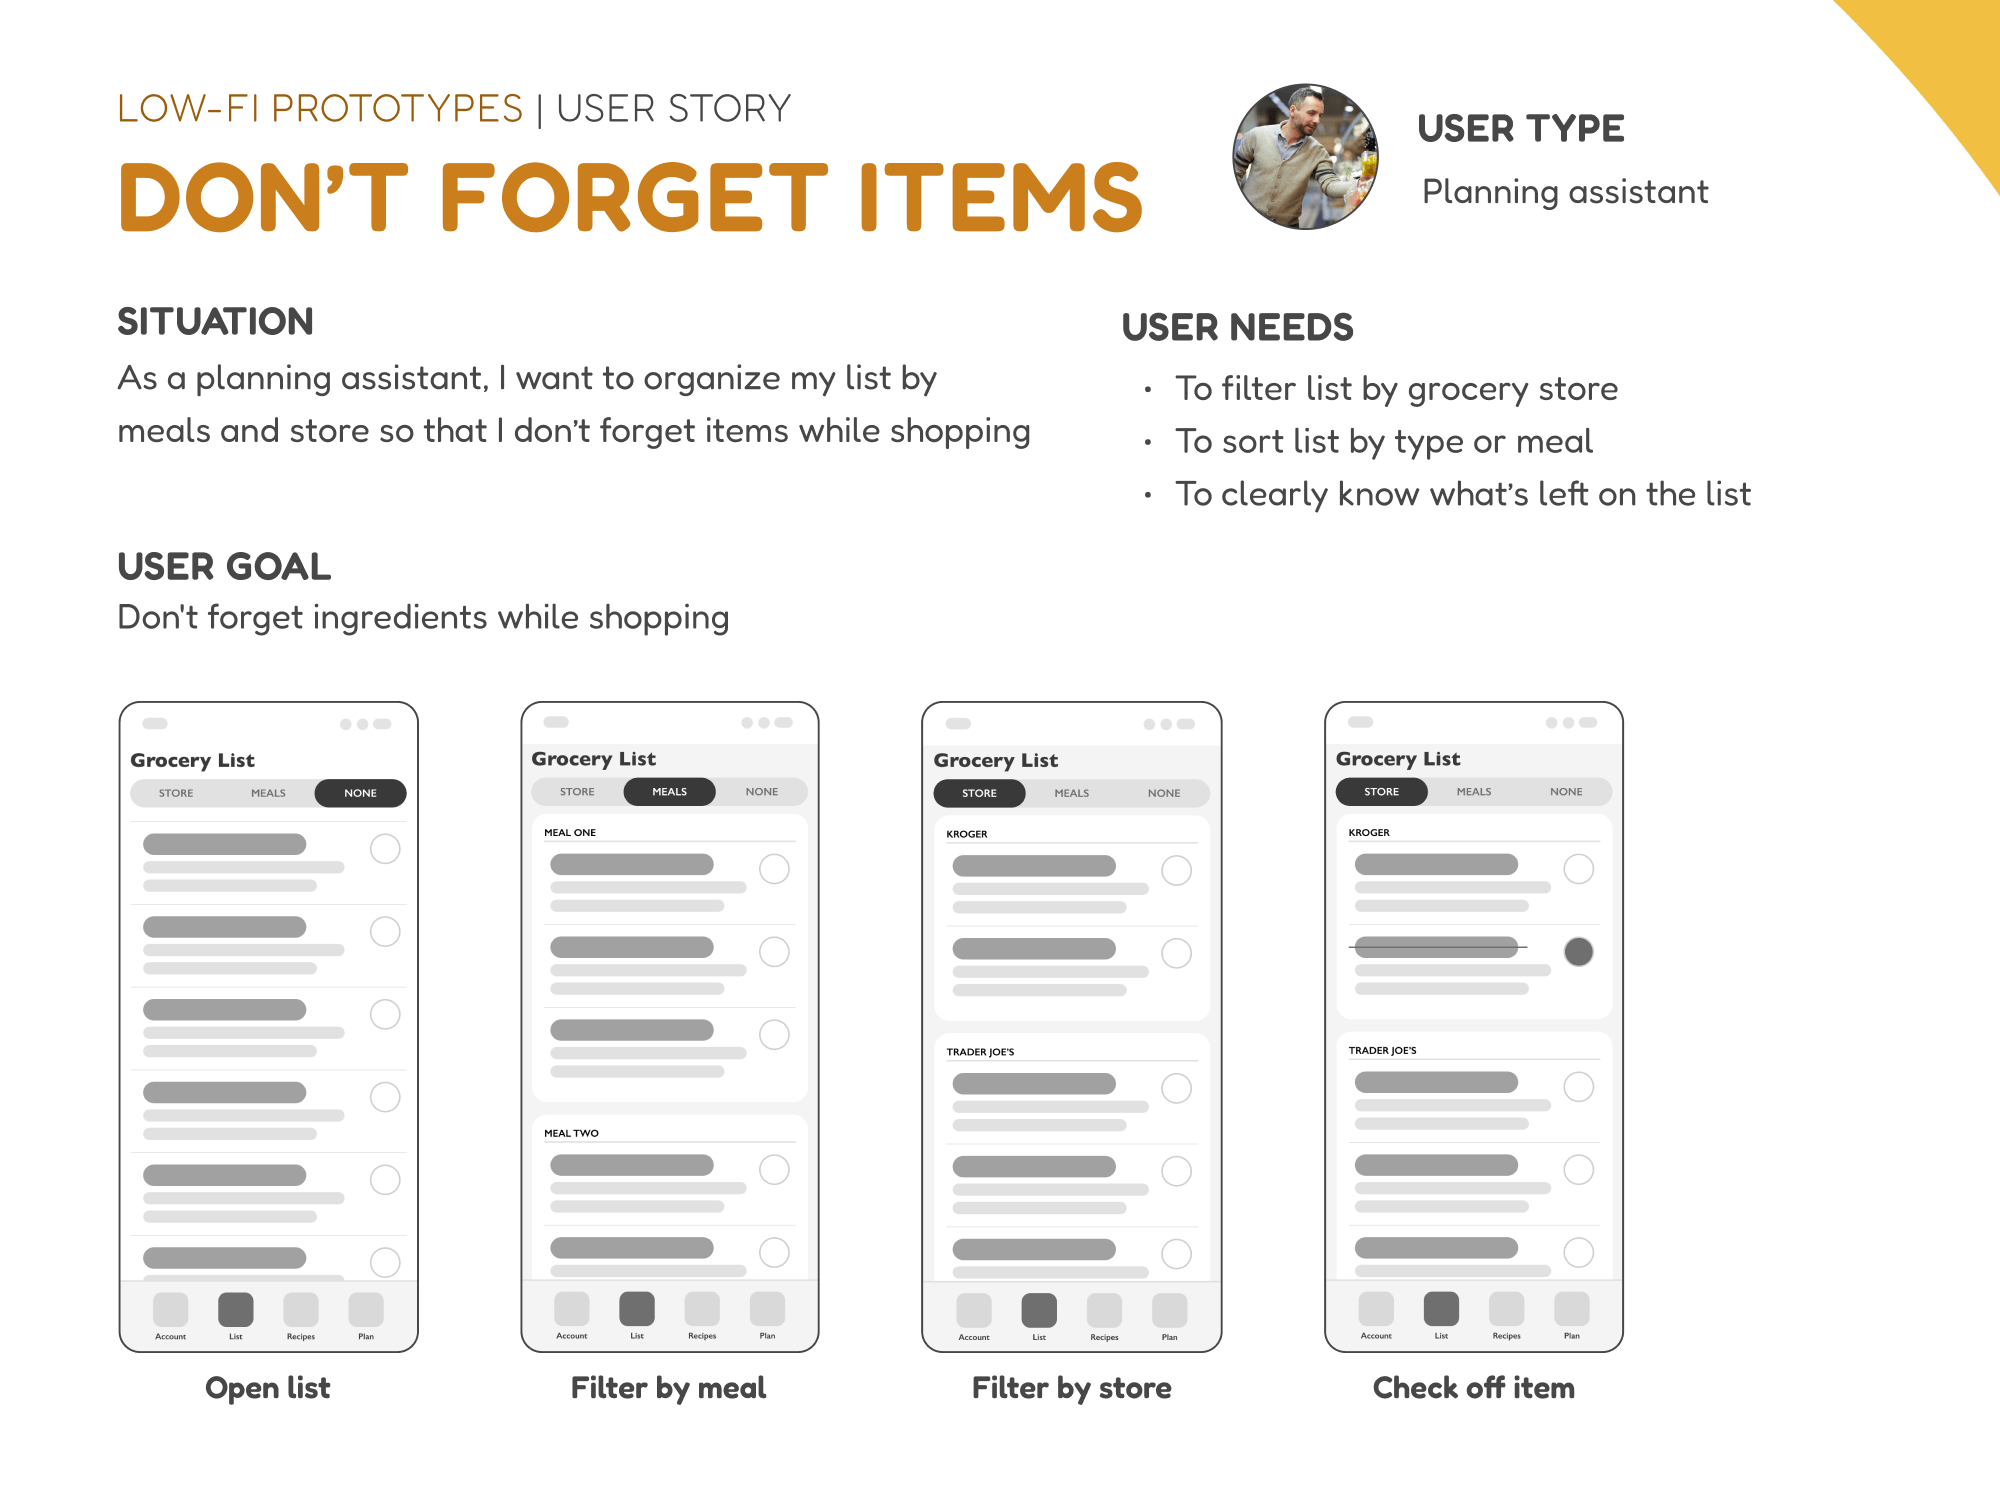 A user story for the planning assistant to not forget items. The situation is that the planning assistant wants to organize their grocery list by meals and store so that they don't forget items.